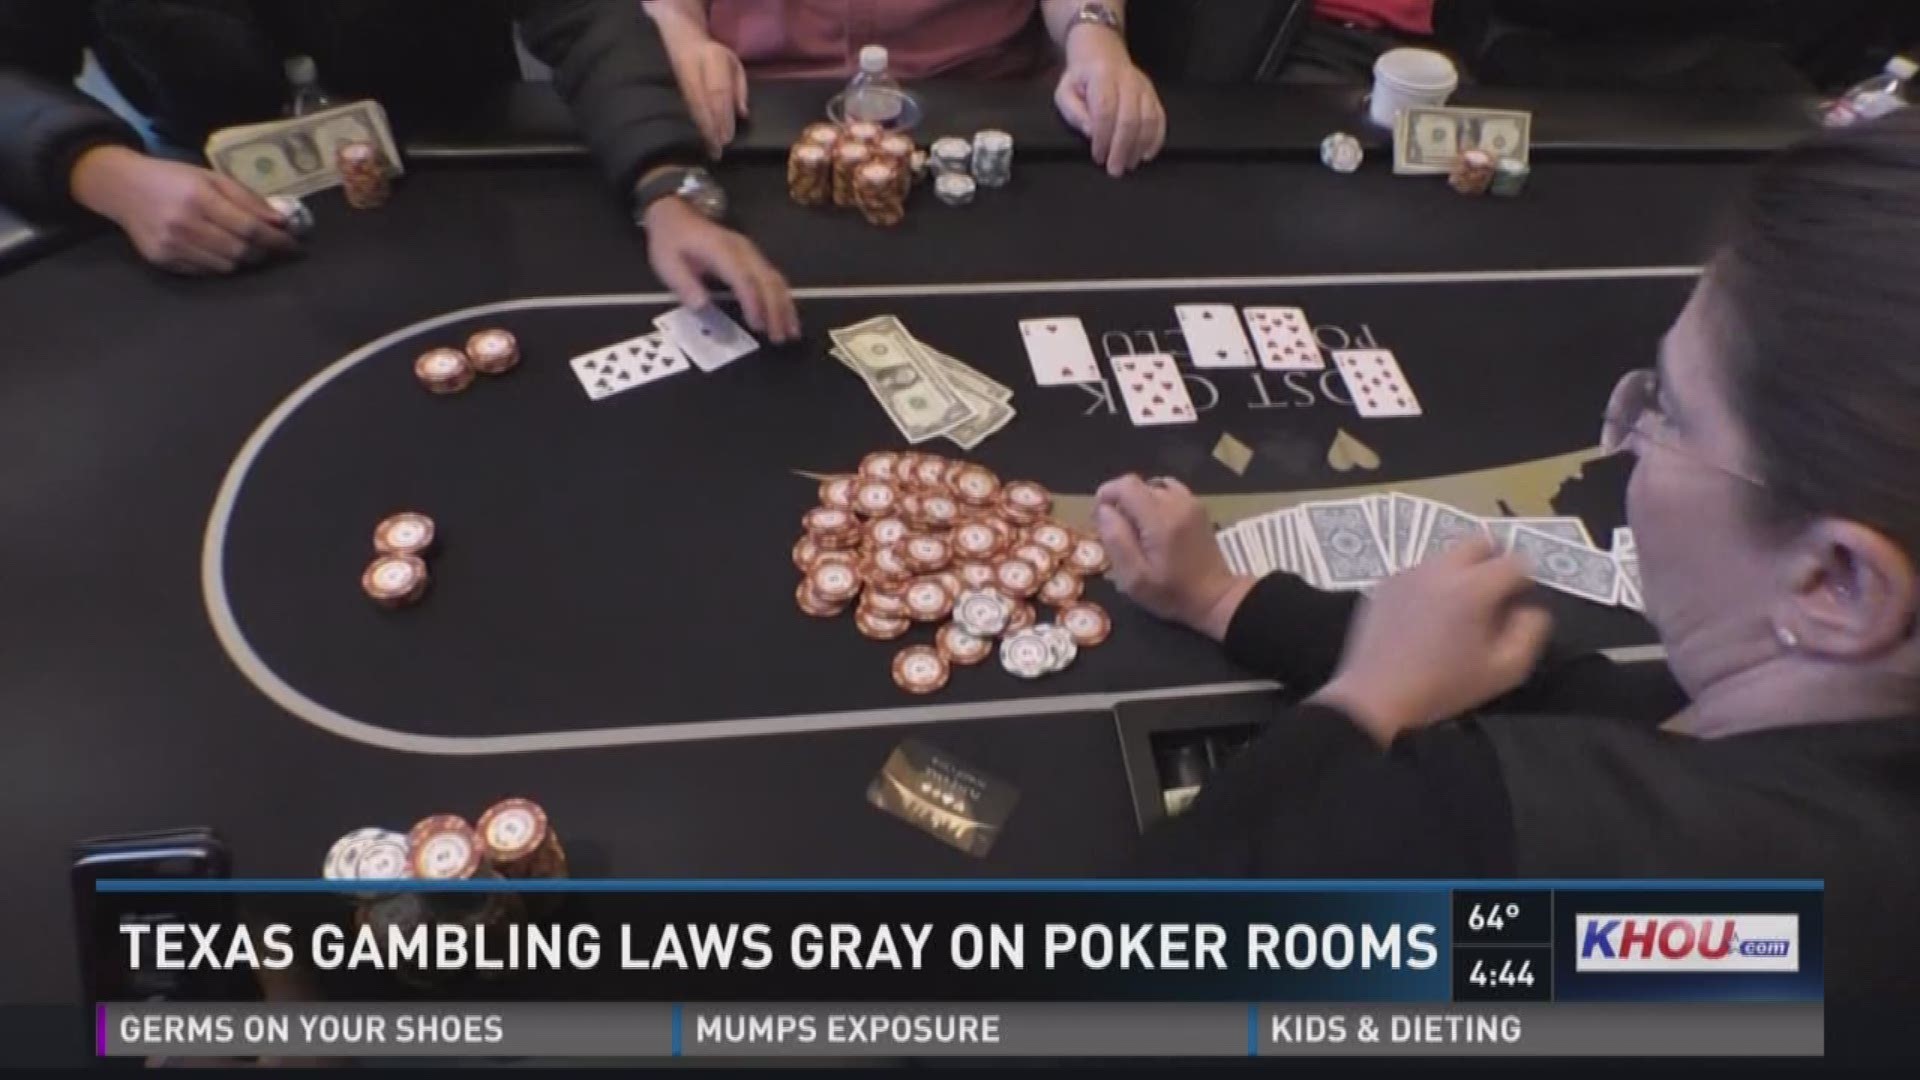 Poker rooms are opening across Texas, raising questions about their legality. But the answer isn't so crystal clear.